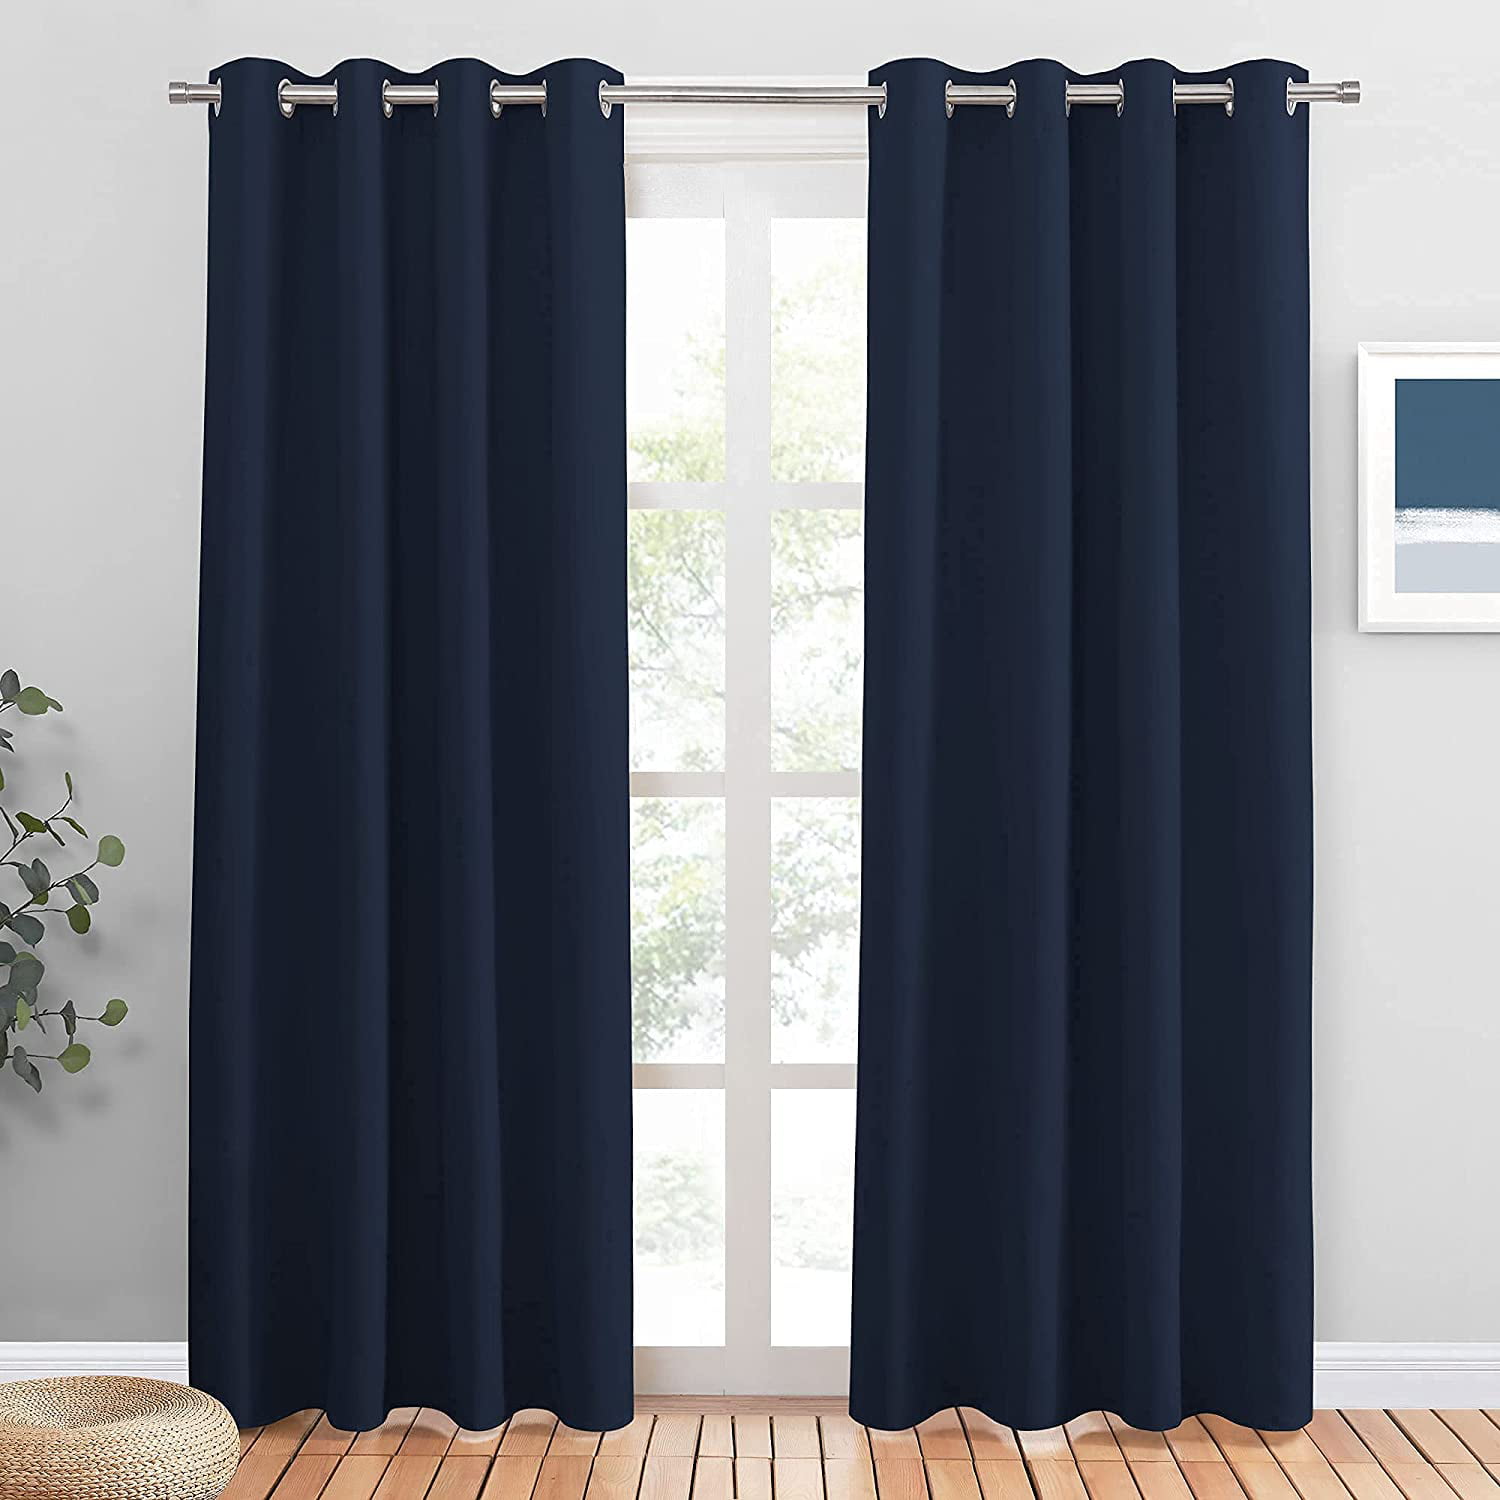 Navy Blue Heavy Duty Home Decor Ring Top Solid Room Darkening Window Treatments Draperies Energy Saving for Kitchen Living Room PONY DANCE Blackout Curtain Panels 52 x 84 2 PCs